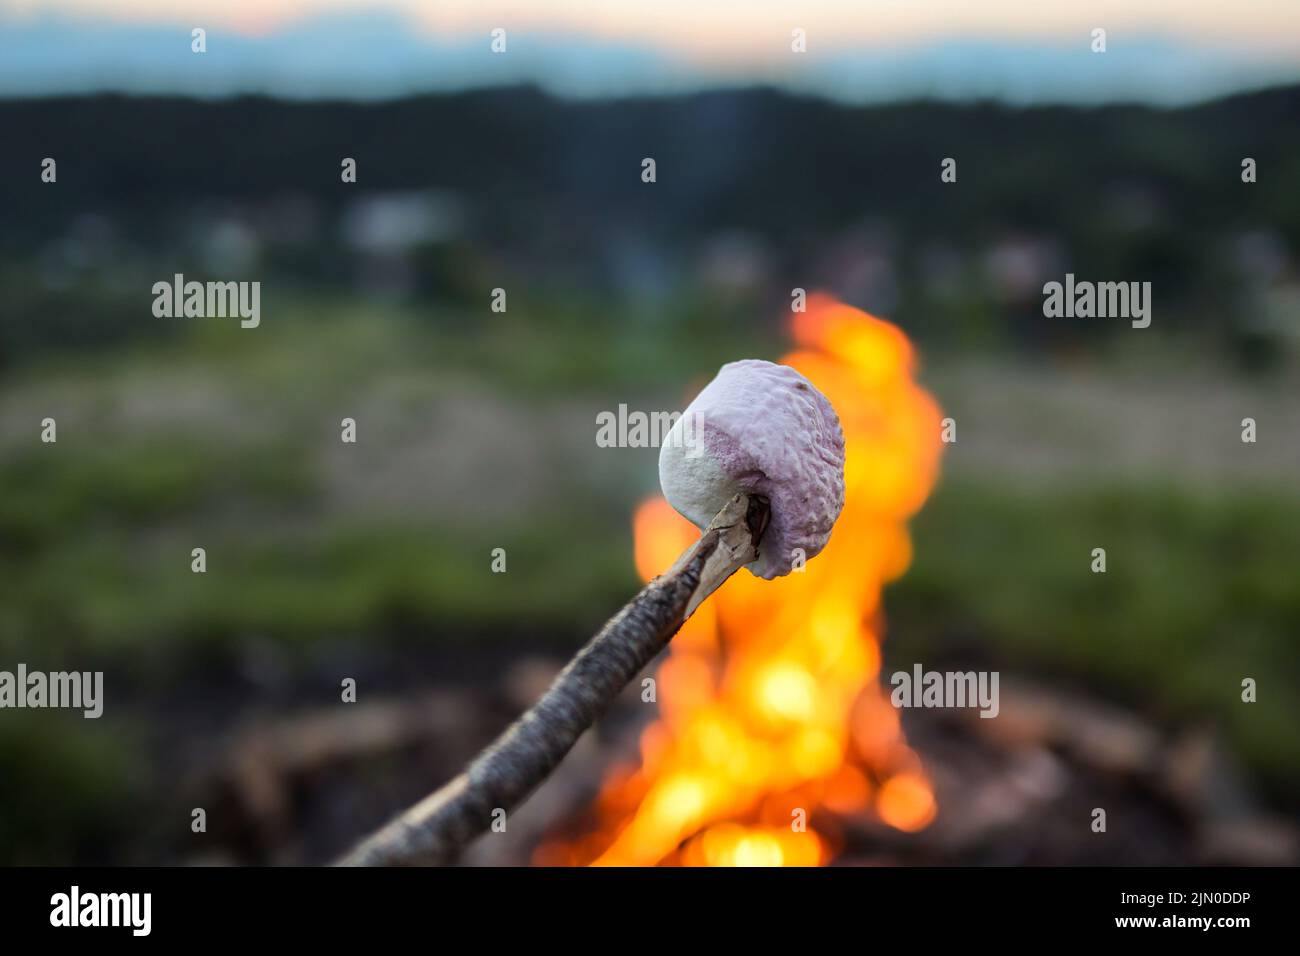 Shallow Depth of Field of Marshmallow in front of Fire. Sugar Confectionery on Stick during Evening Outside. Stock Photo